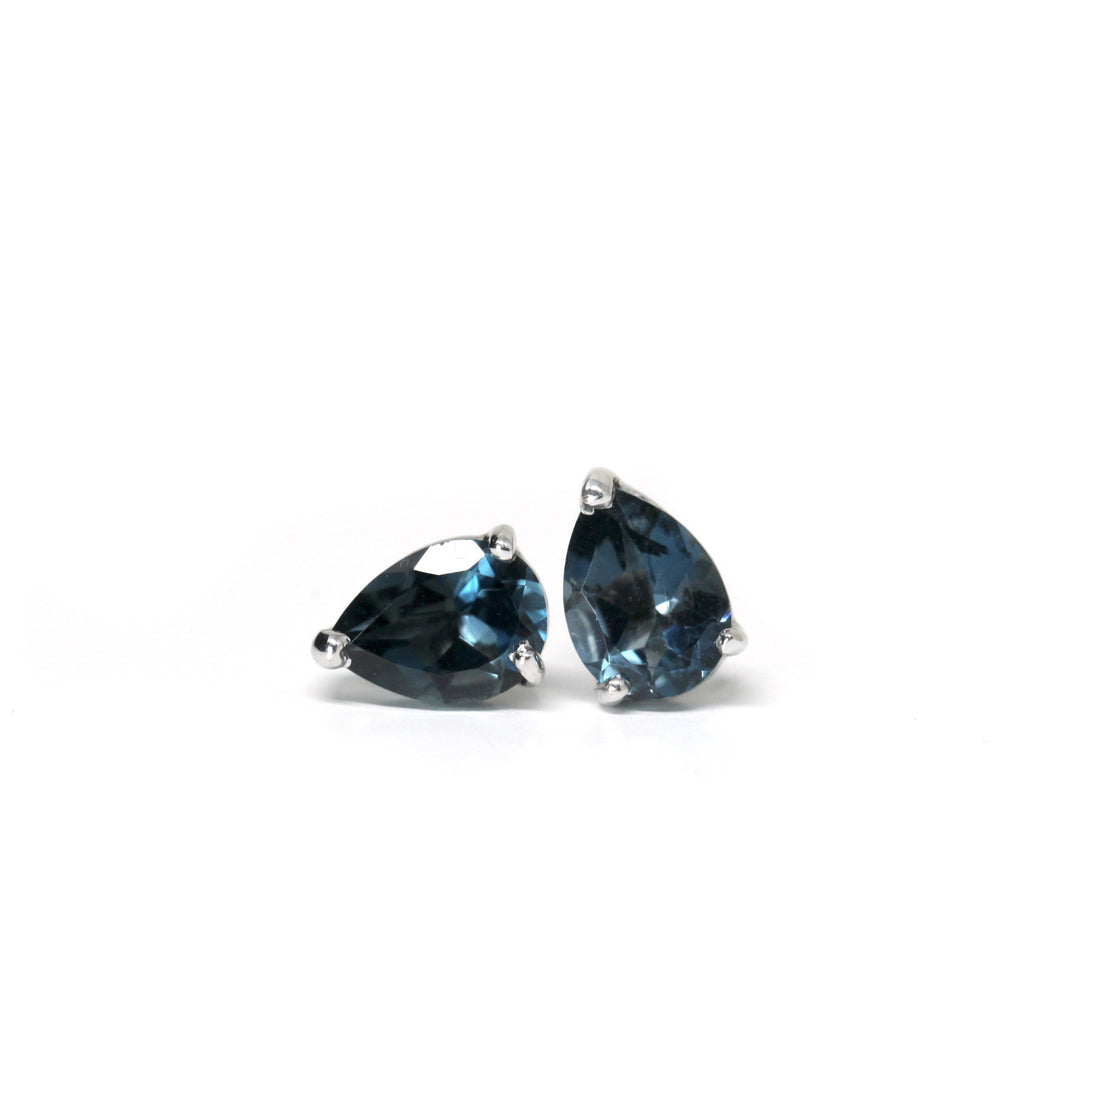 Front view of topaz pear shape stud earrings silver jewelry custom made in montreal canada fine jewelry designer fine jewelry specialist montreal hande in canada fine jewelry blue gemstone stud earrings bena jewelry edgy fine gems montreal handmade in canada